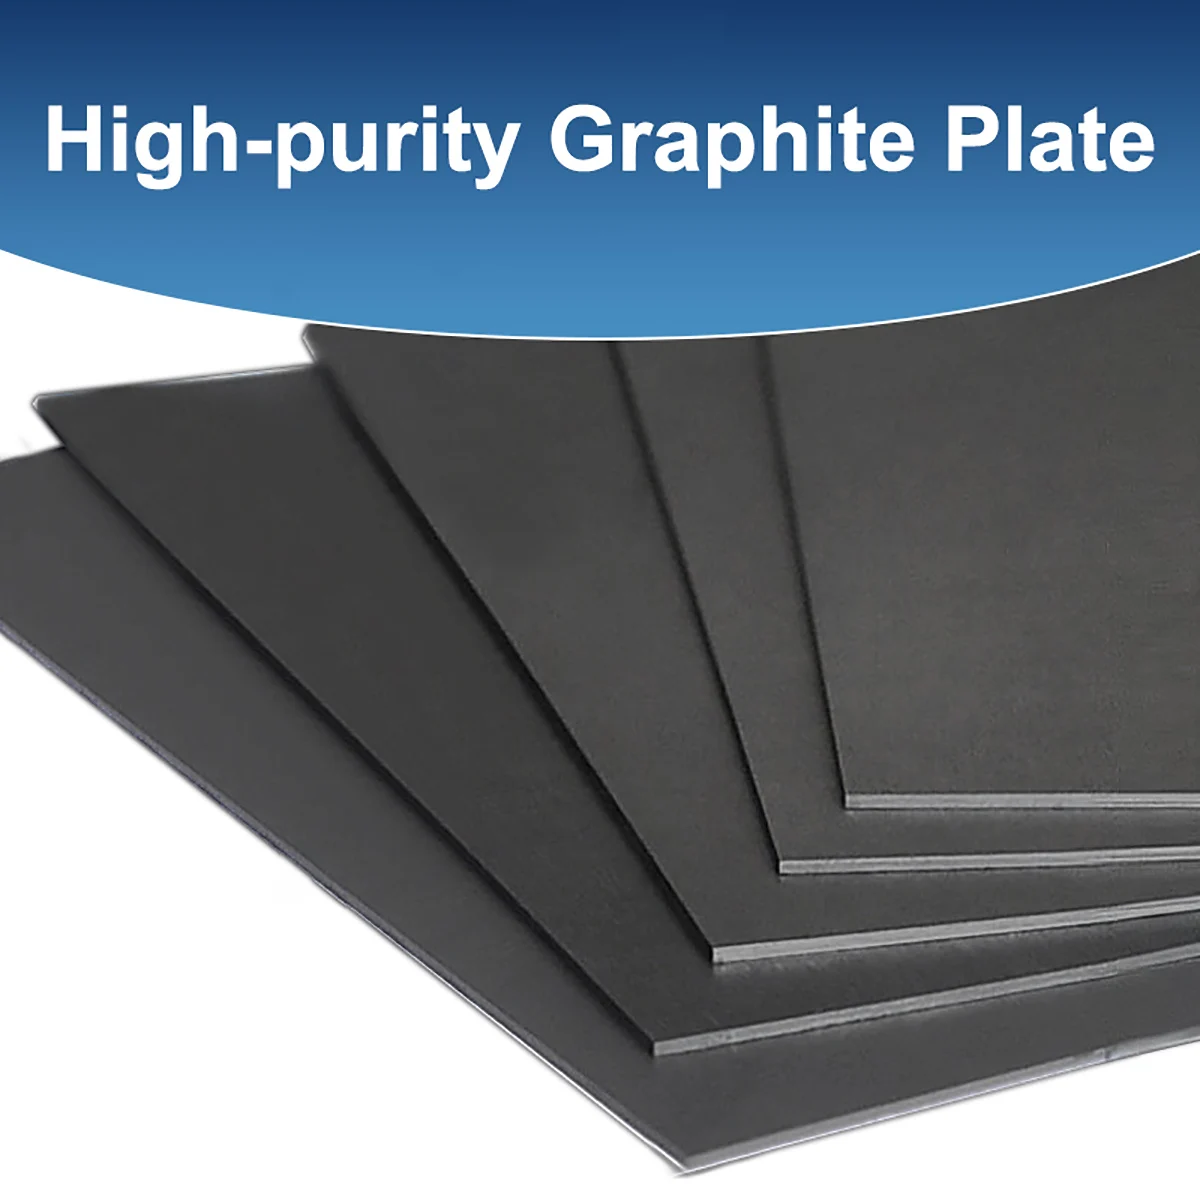 

5Pcs High-purity Graphite Sheet High Temperature Electrode Plate Graphite Plate Edm Carbon Graphite Plate 30x30 40x30 40x40mm